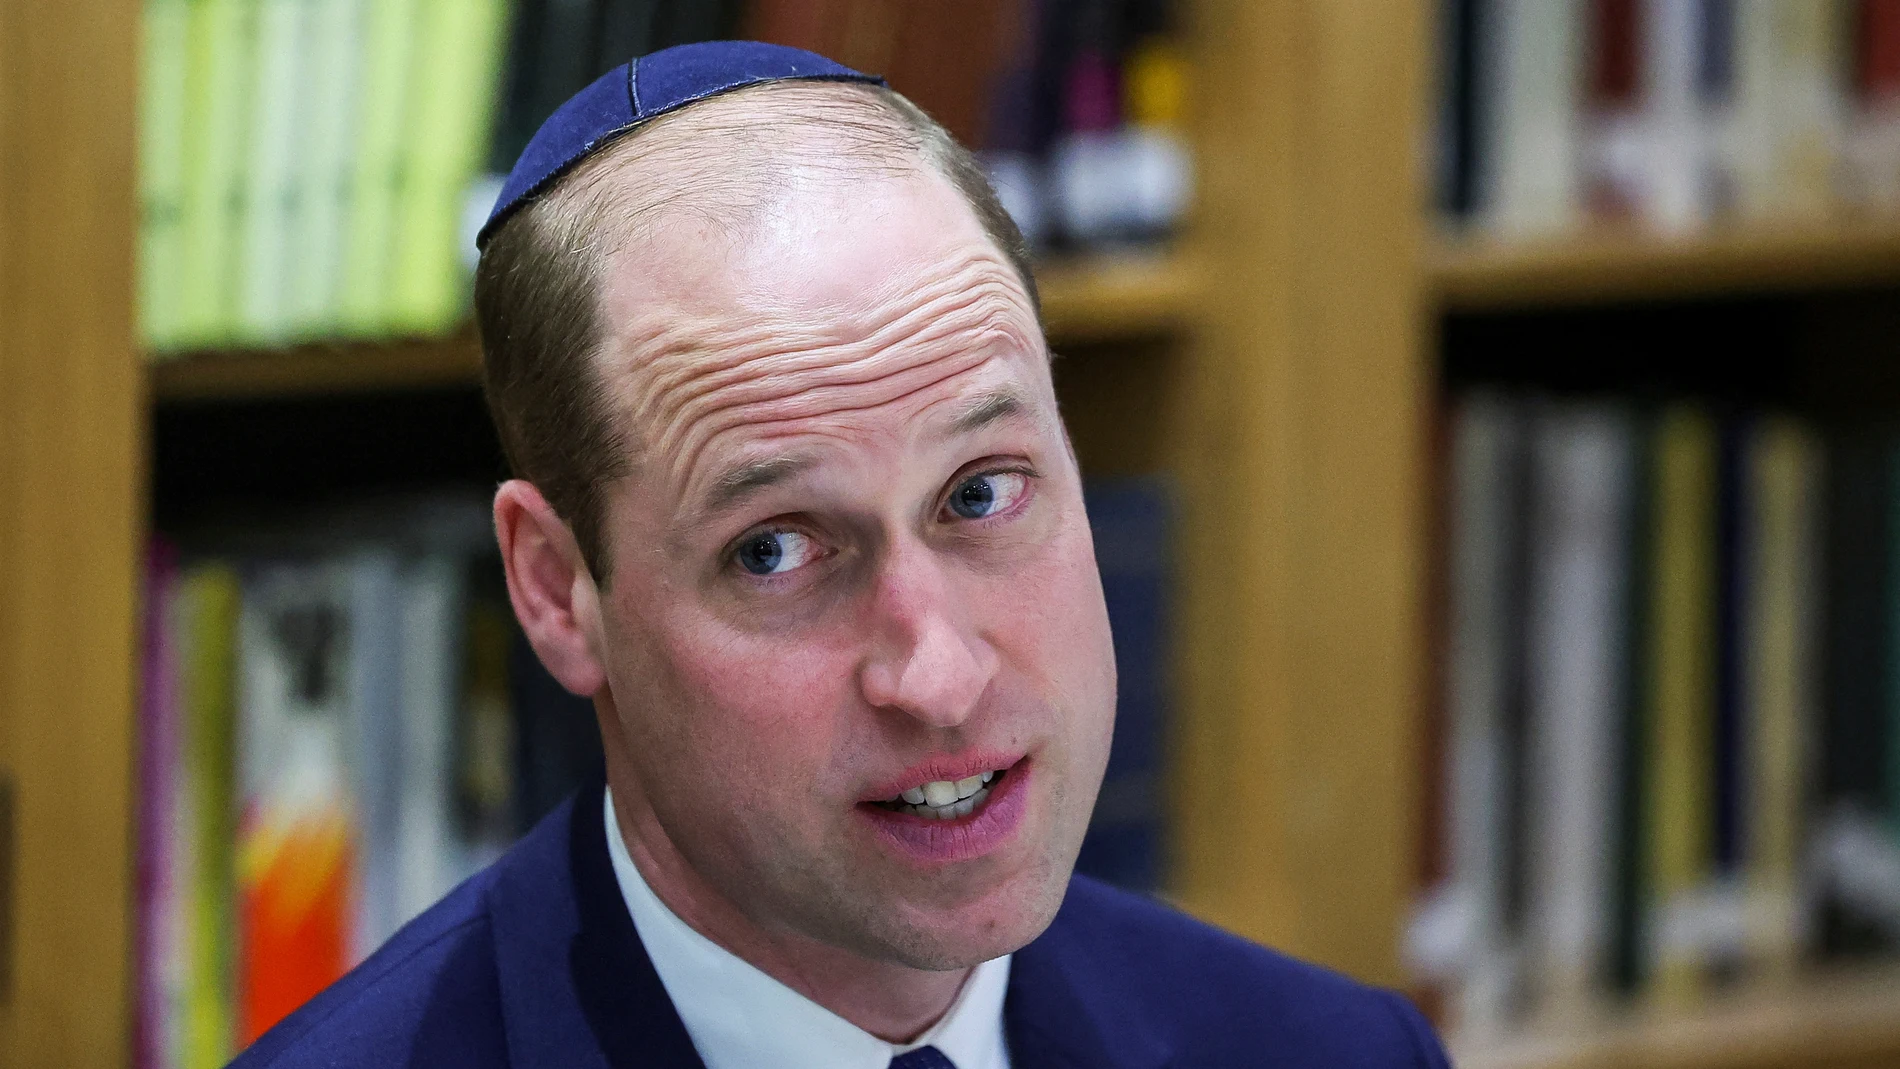 Britain's Prince William looks on as he visits the Western Marble Arch Synagogue, in London, Britain, Feb. 29, 2024. (Toby Melville/Pool photo via AP)